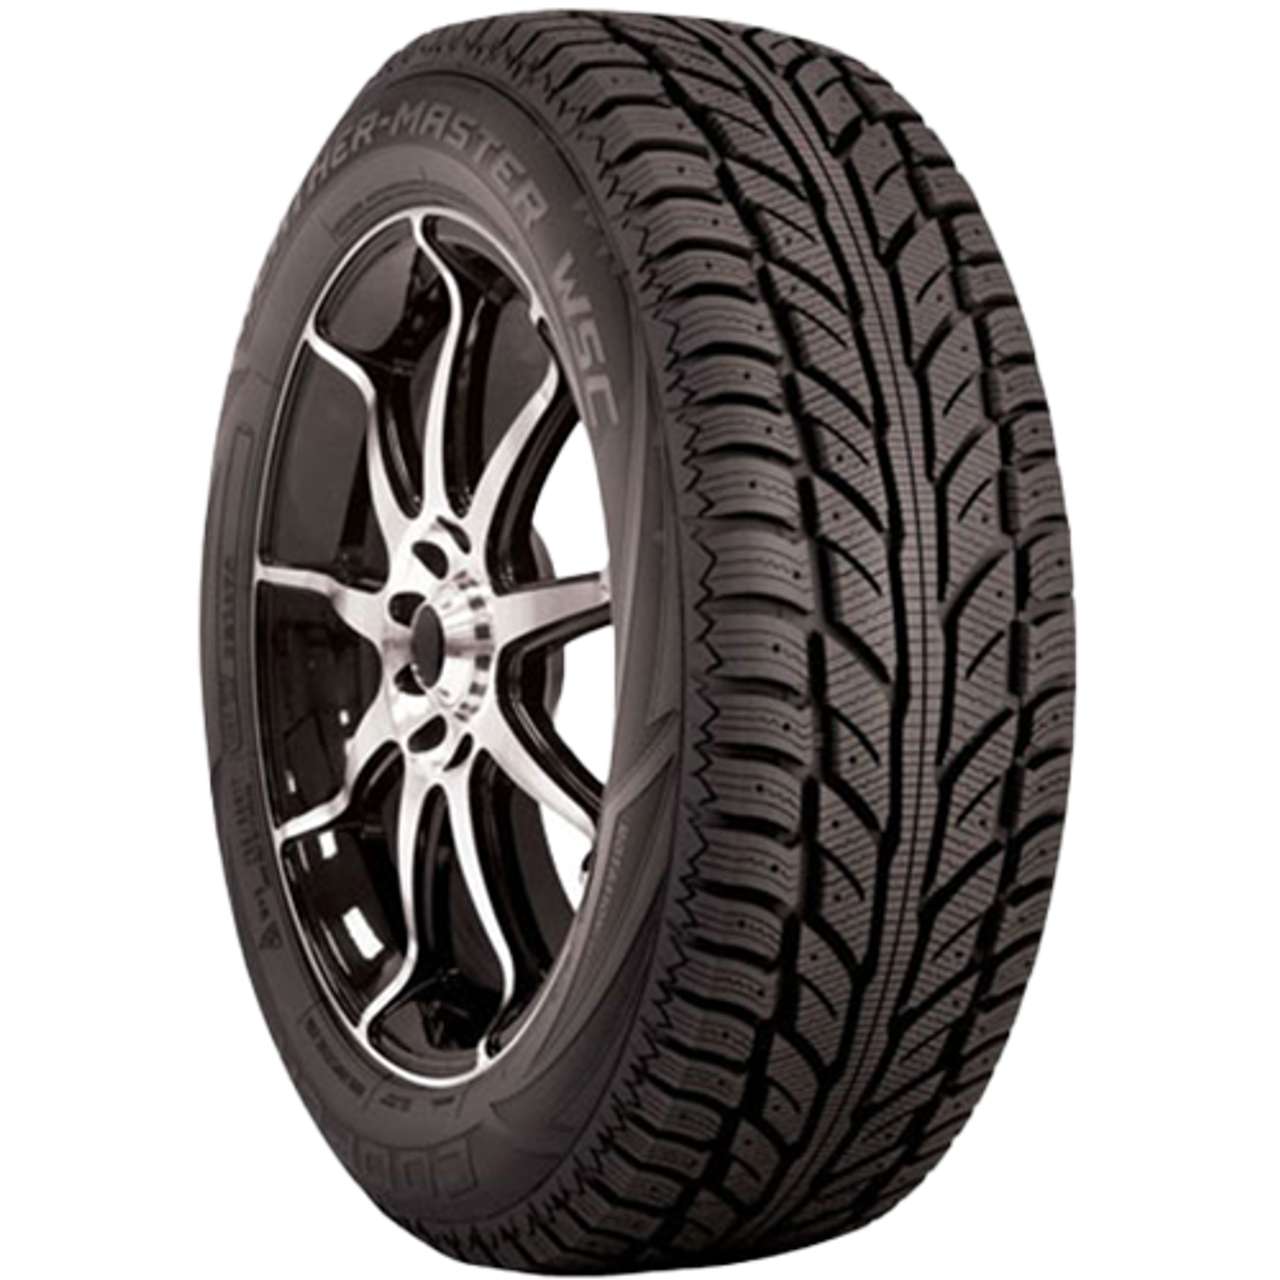 COOPER WEATHERMASTER WSC 235/65R17 108T STUDDABLE BSW XL